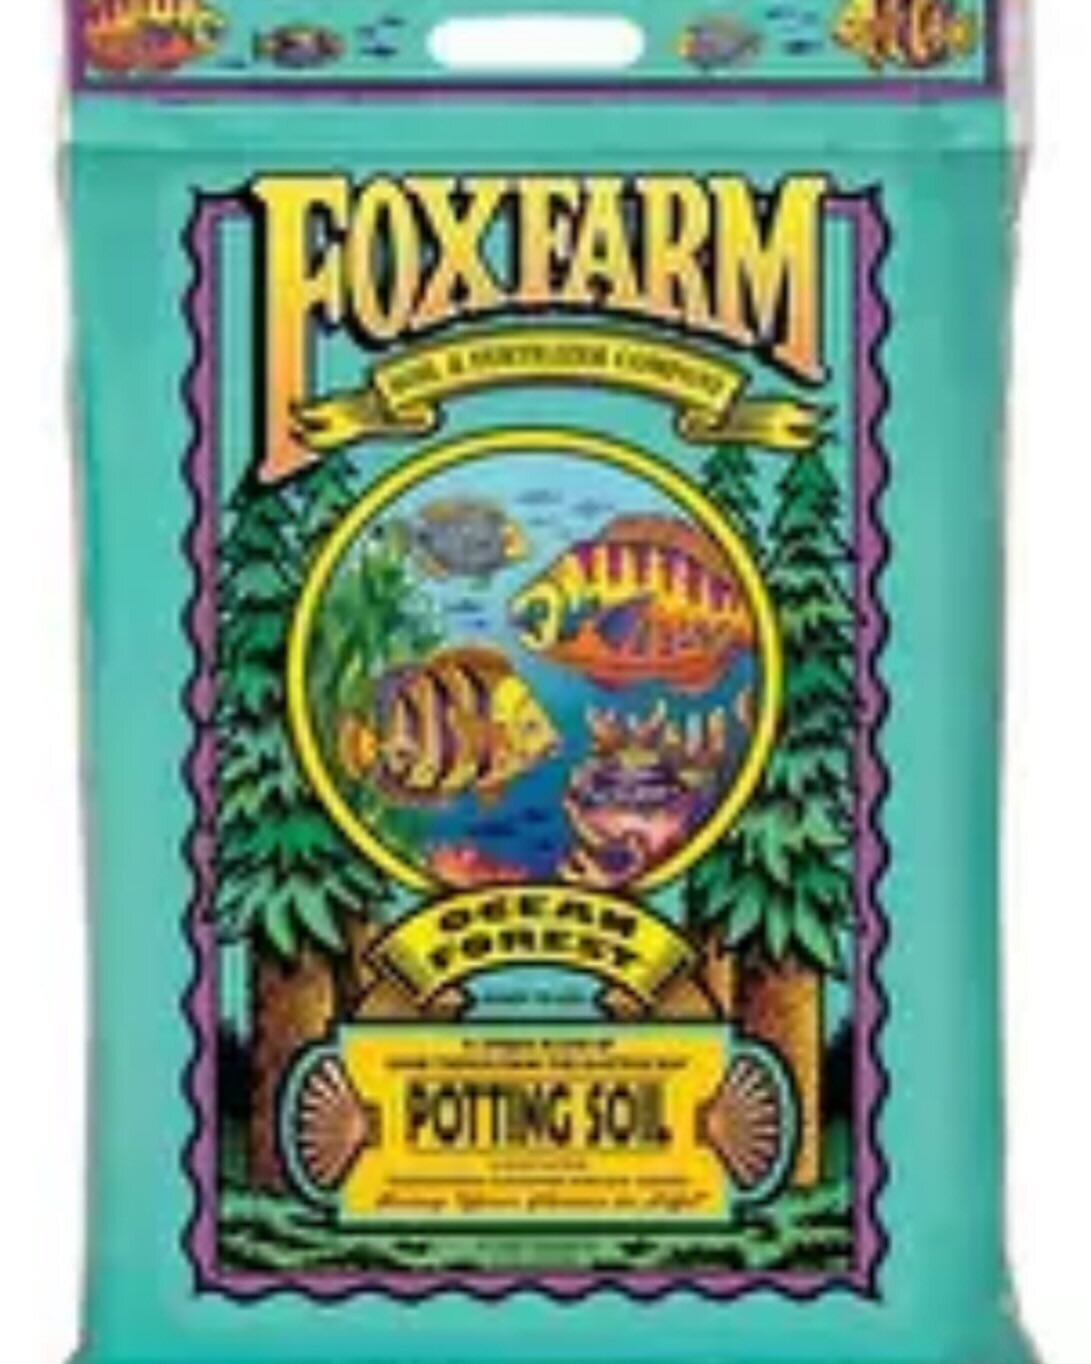 If you haven&rsquo;t tried our Fox Farm brand of soils and fertilizers yet,  now is a great time to try it out. 

Ocean Forest Potting Soil has all the right ingredients along with fish fertilizer to give your plants the boost they need.

Happy Frog 